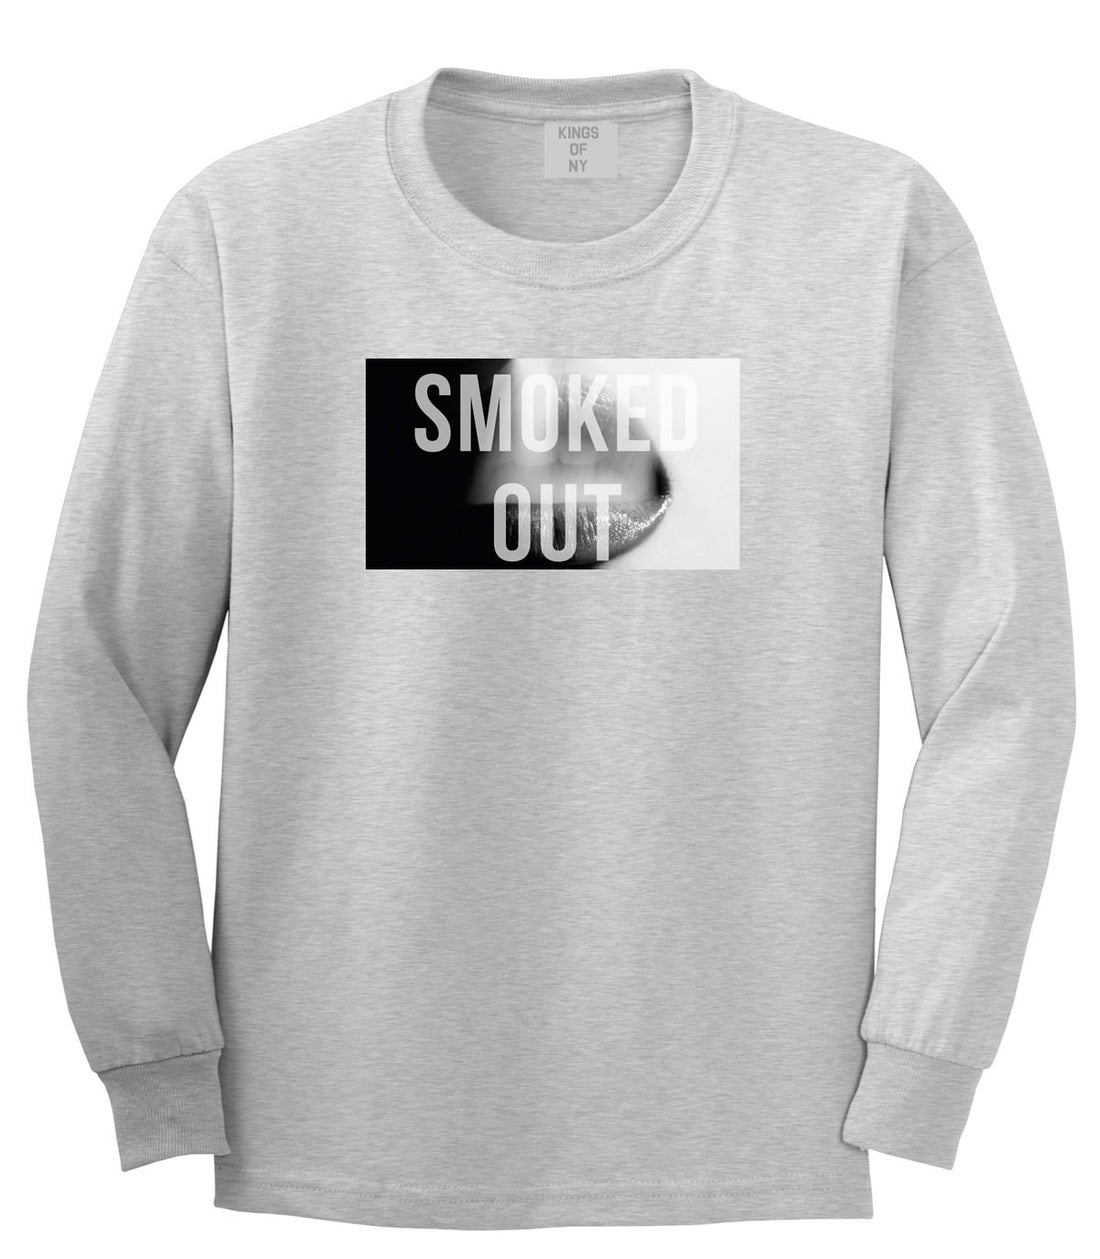 Smoked Out Weed Marijuana Girls Pot New York Long Sleeve T-Shirt In Grey by Kings Of NY